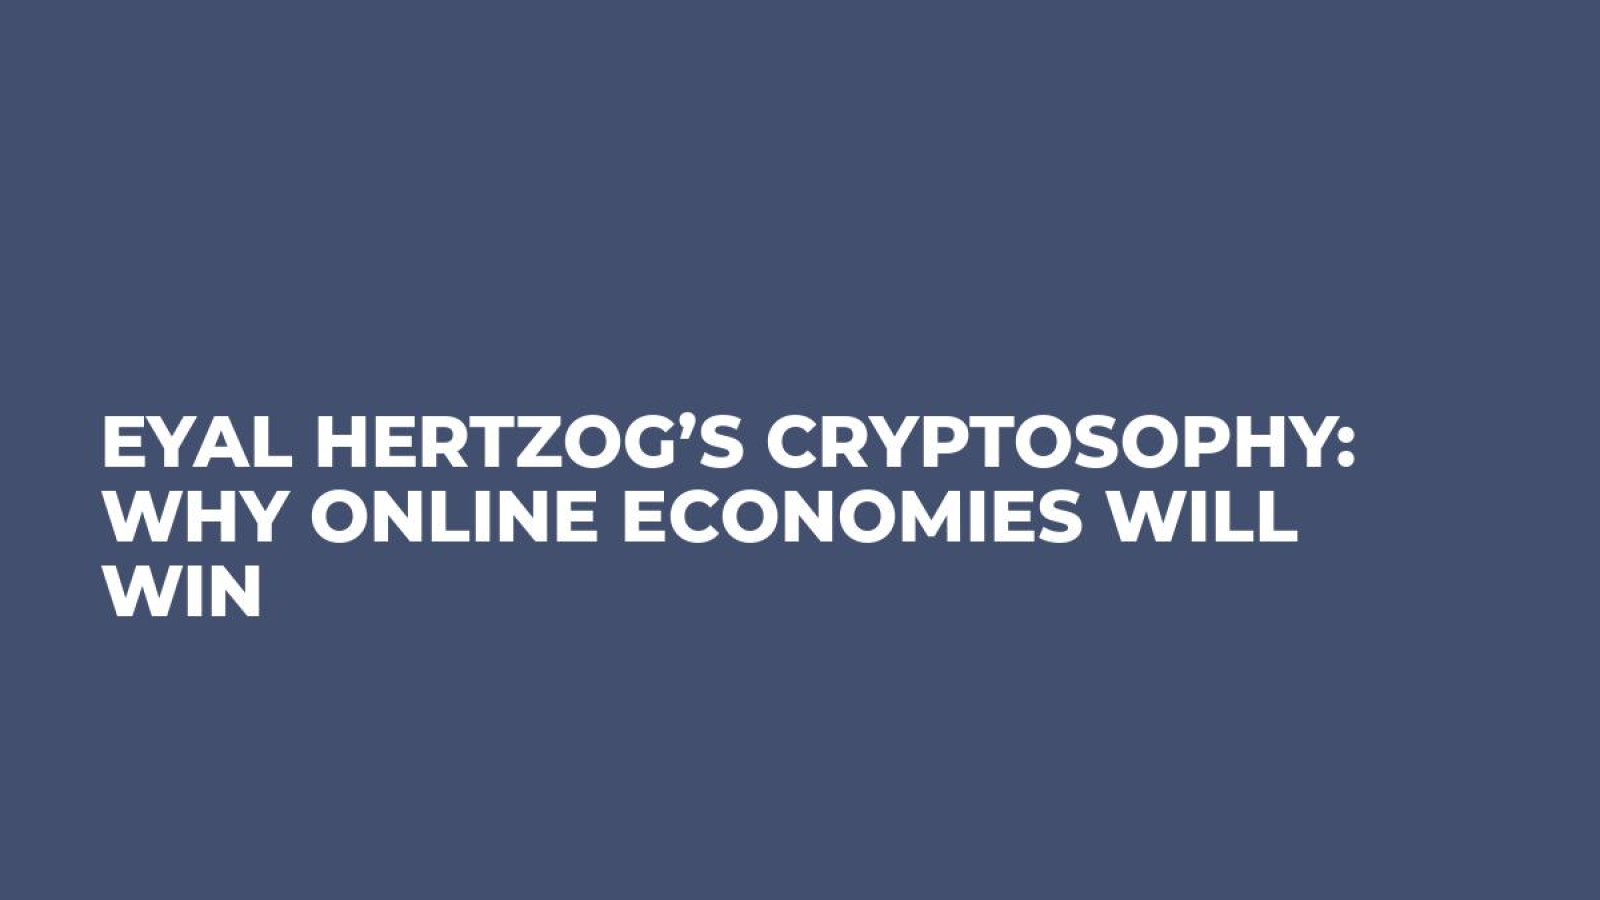 Eyal Hertzog’s Cryptosophy: Why Online Economies Will Win